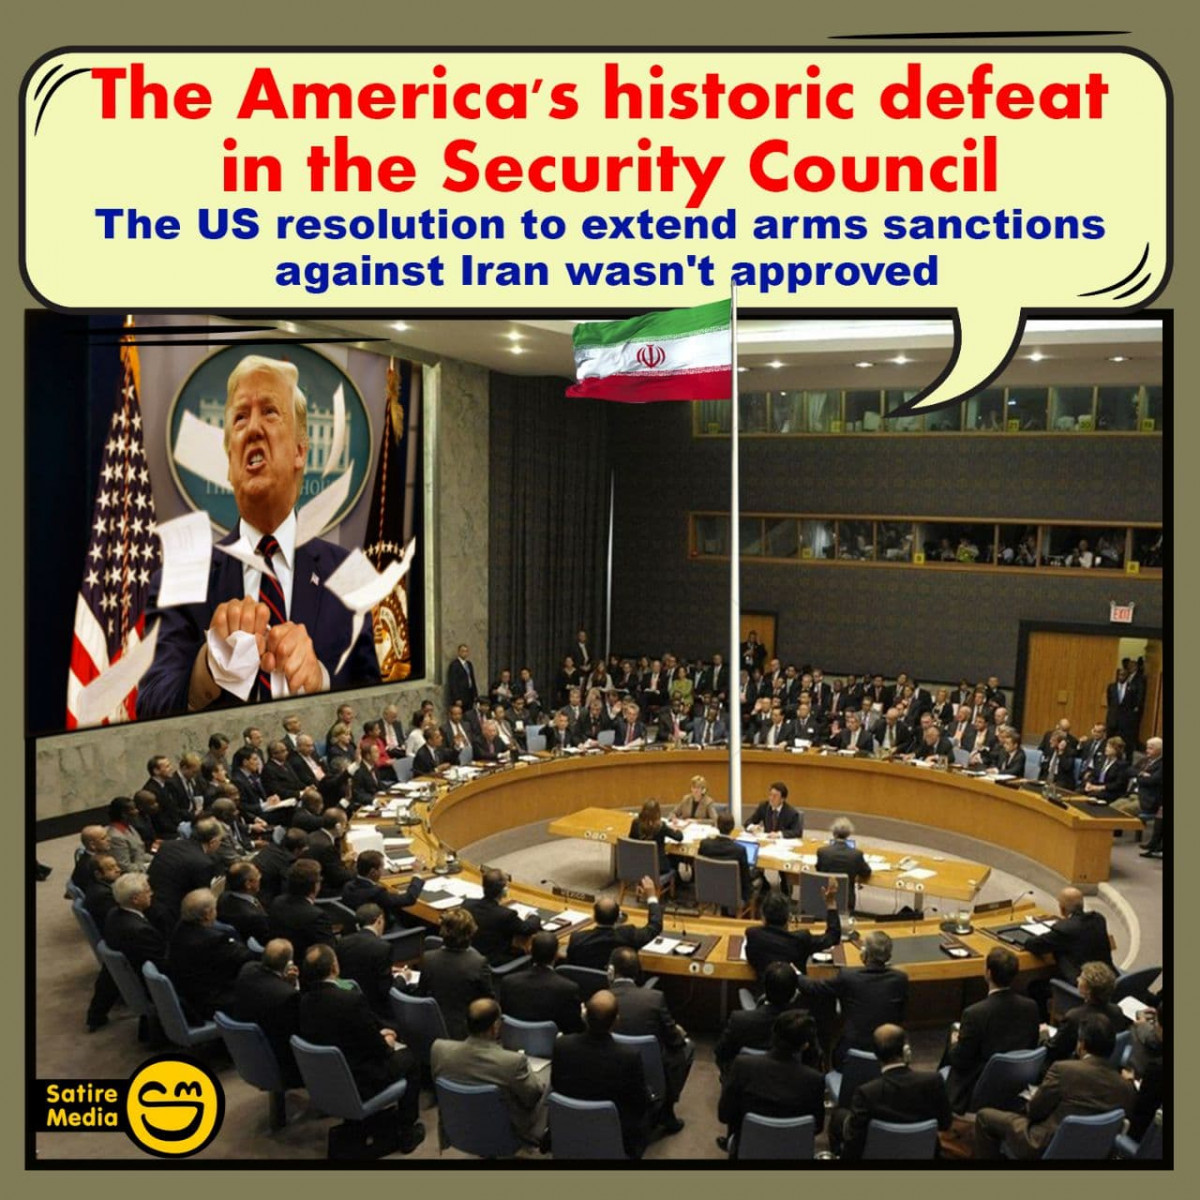 The America's historic defeat in the Security Council